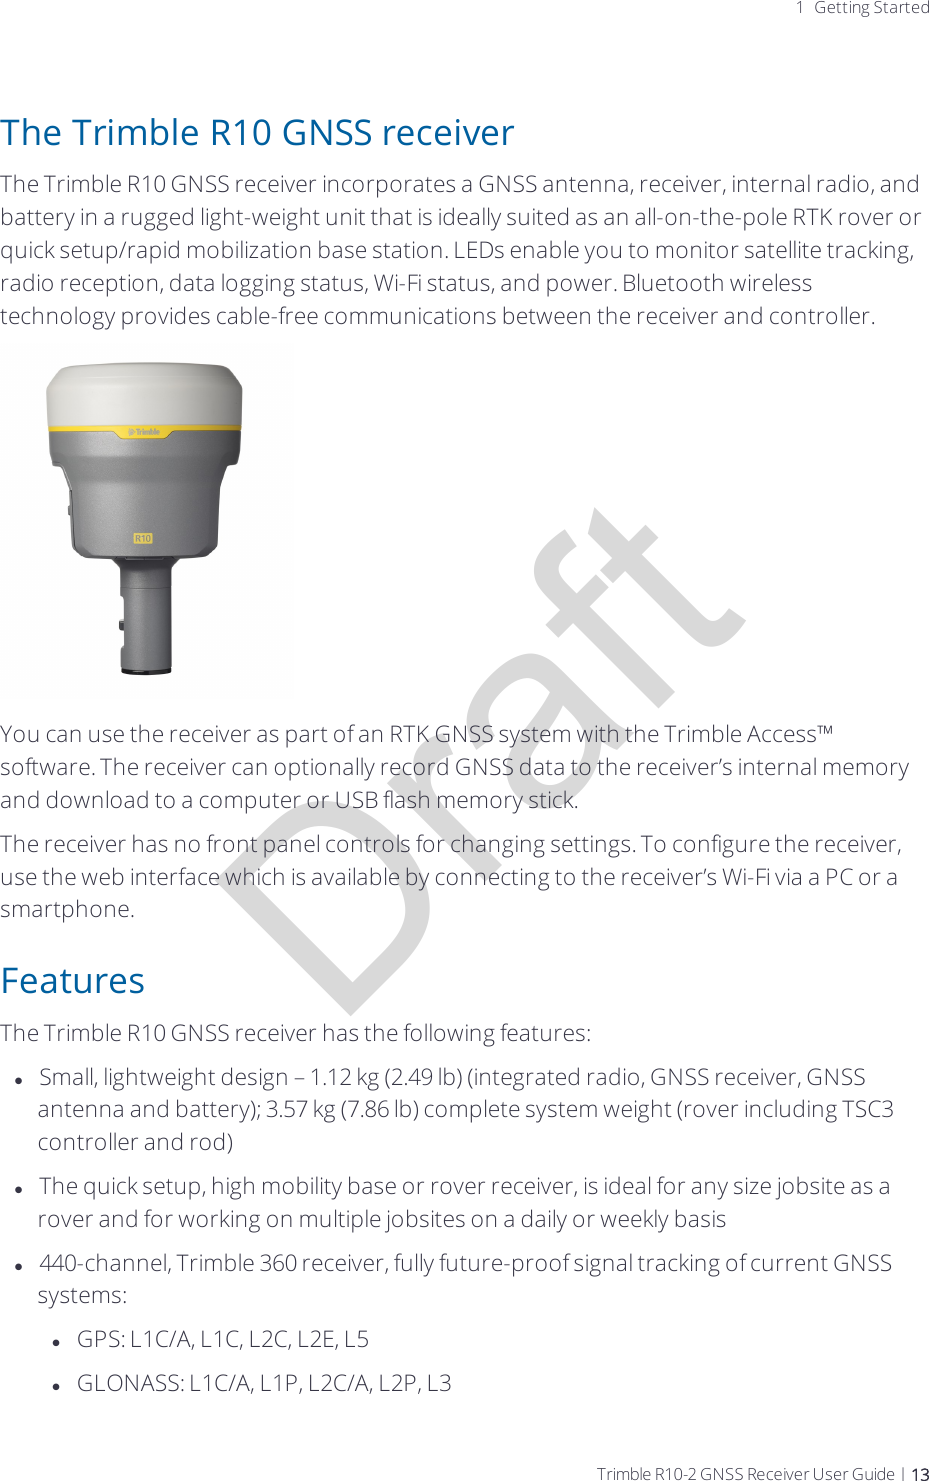 Draft1 Getting StartedThe Trimble R10 GNSS receiverThe Trimble R10 GNSS receiver incorporates a GNSS antenna, receiver, internal radio, and battery in a rugged light-weight unit that is ideally suited as an all-on-the-pole RTK rover or quick setup/rapid mobilization base station. LEDs enable you to monitor satellite tracking, radio reception, data logging status, Wi-Fi status, and power. Bluetooth wireless technology provides cable-free communications between the receiver and controller.You can use the receiver as part of an RTK GNSS system with the Trimble Access™ software. The receiver can optionally record GNSS data to the receiver’s internal memory and download to a computer or USB flash memory stick.The receiver has no front panel controls for changing settings. To configure the receiver, use the web interface  which is available by connecting to the receiver’s Wi-Fi via a PC or a smartphone. FeaturesThe Trimble R10 GNSS receiver has the following features:lSmall, lightweight design – 1.12 kg (2.49 lb) (integrated radio, GNSS receiver, GNSS antenna and battery); 3.57 kg (7.86 lb) complete system weight (rover including TSC3 controller and rod)lThe quick setup, high mobility base or rover receiver, is ideal for any size jobsite as a rover and for working on multiple jobsites on a daily or weekly basisl440-channel, Trimble 360 receiver, fully future-proof signal tracking of current GNSS systems:lGPS: L1C/A, L1C, L2C, L2E, L5lGLONASS: L1C/A, L1P, L2C/A, L2P, L3Trimble R10-2 GNSS Receiver User Guide | 13